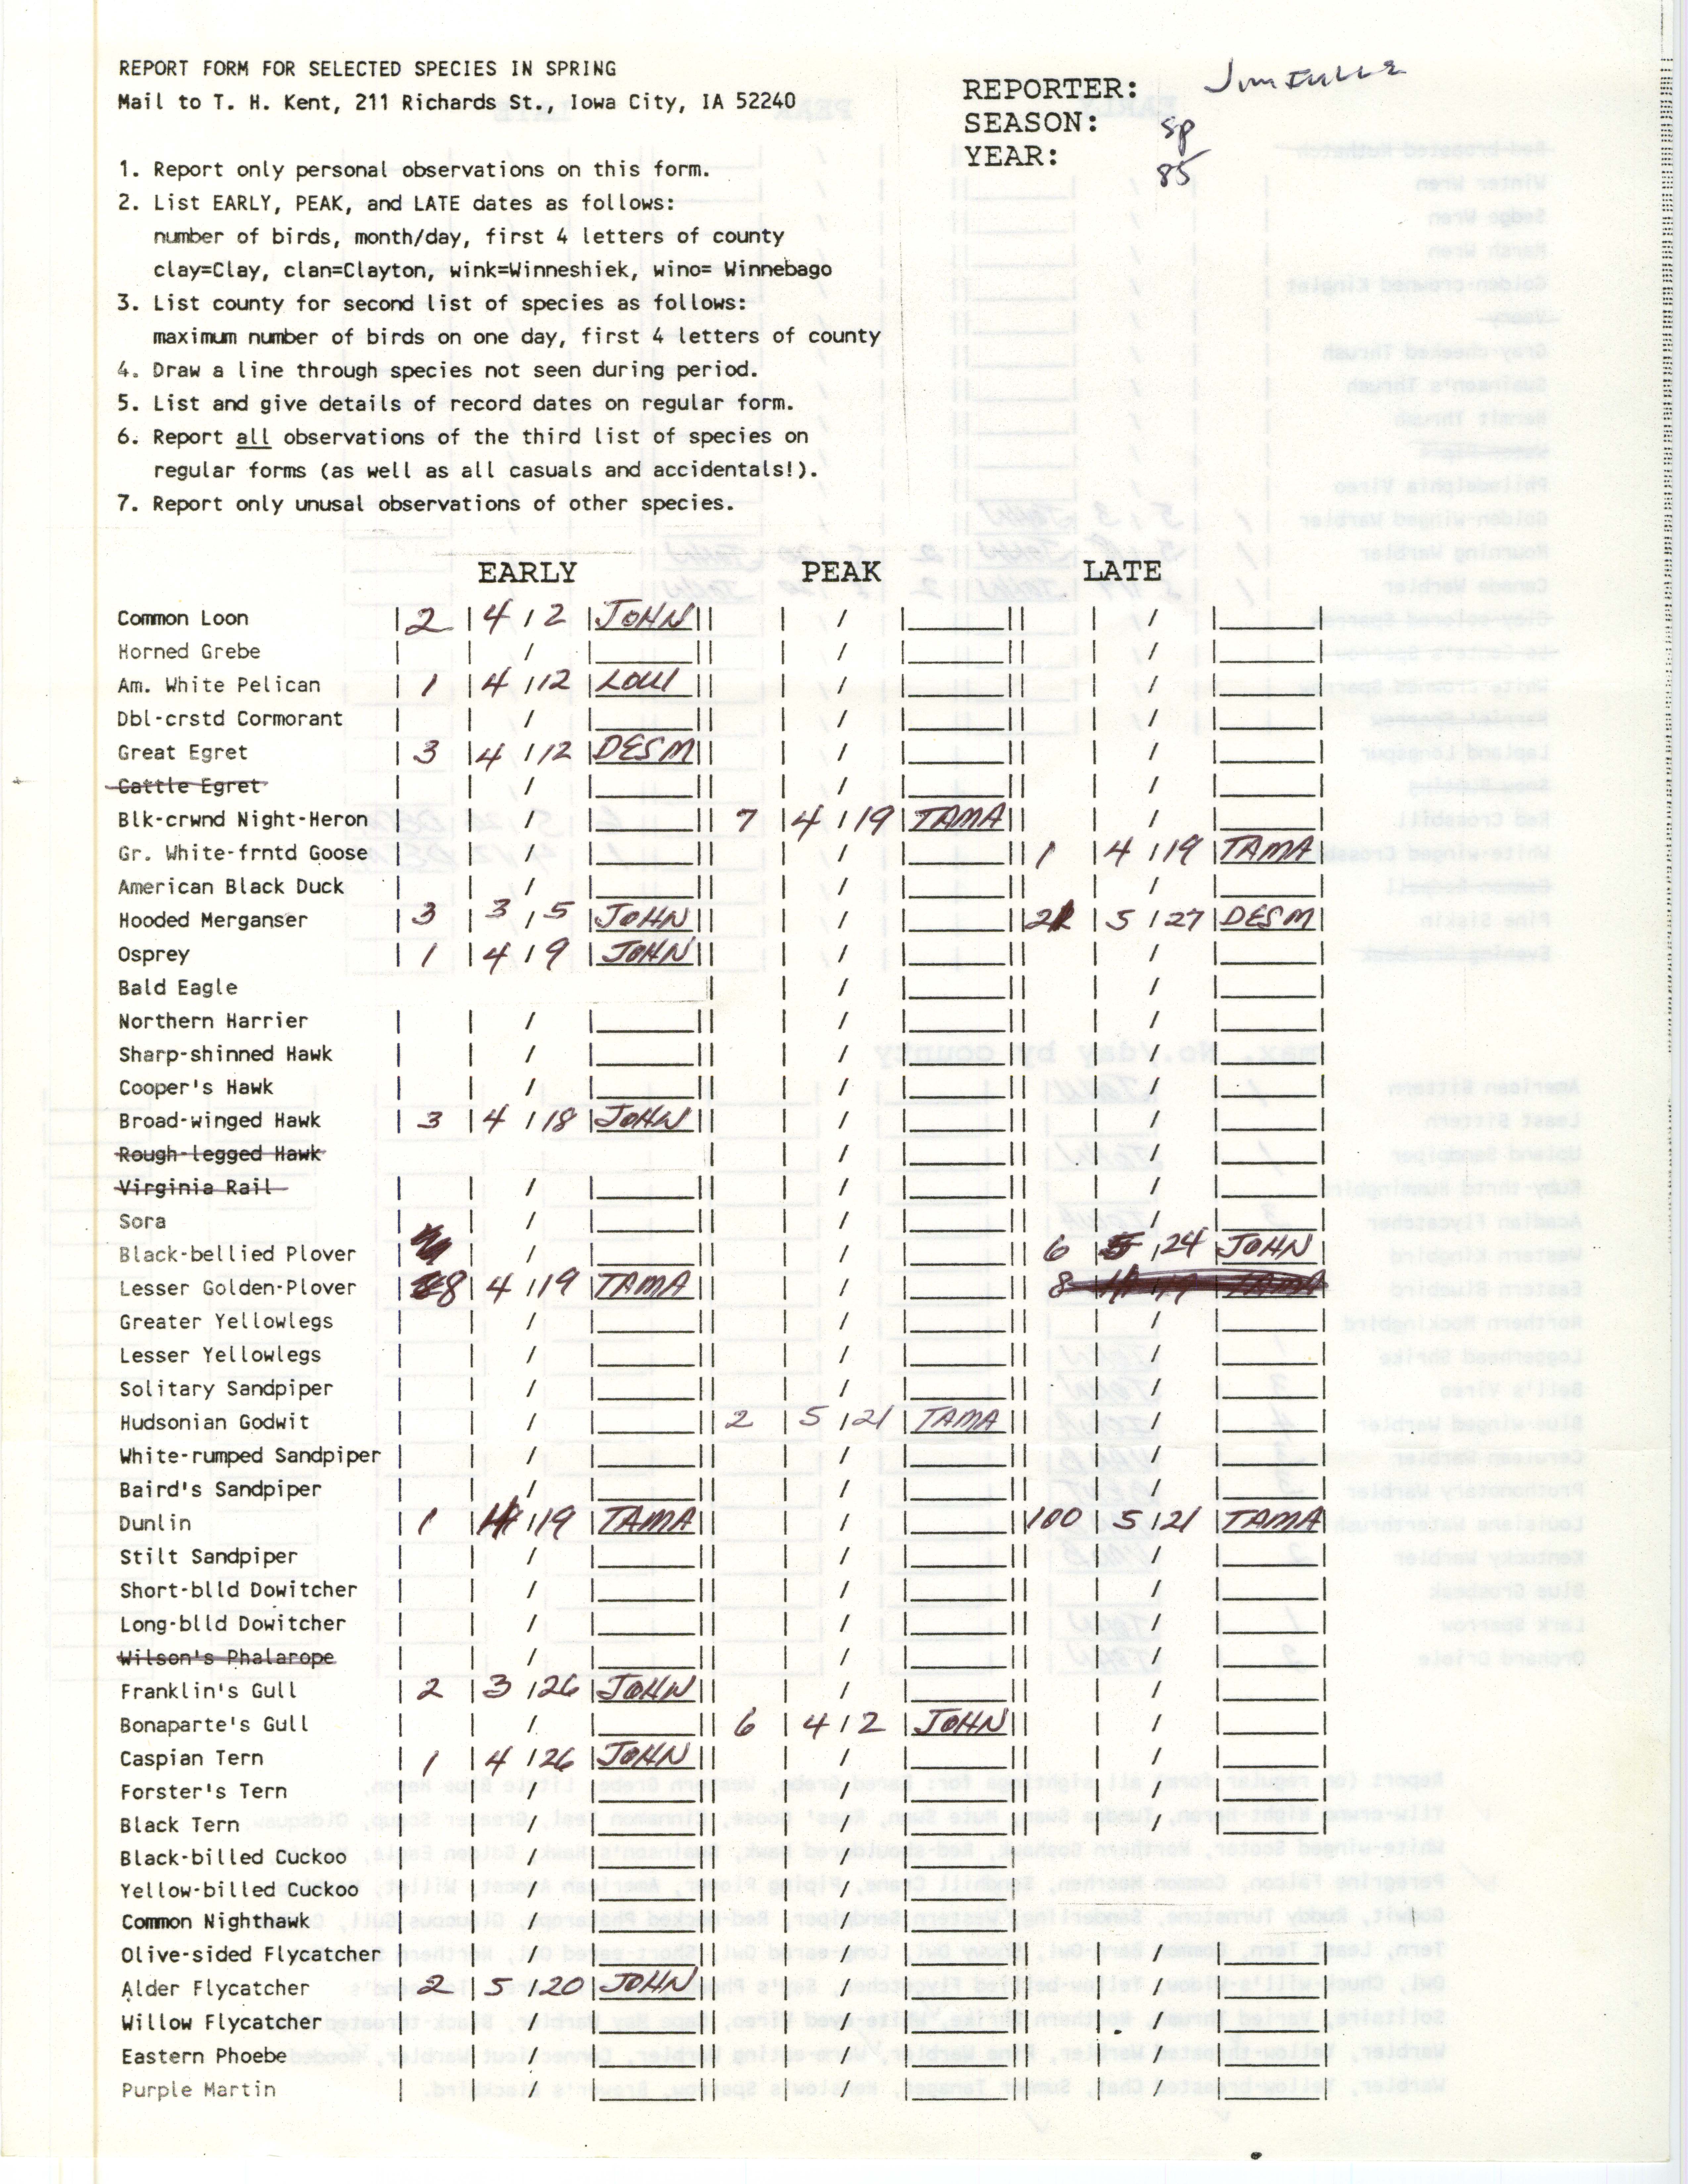 Report form for selected species in spring, contributed by James L. Fuller, spring 1985